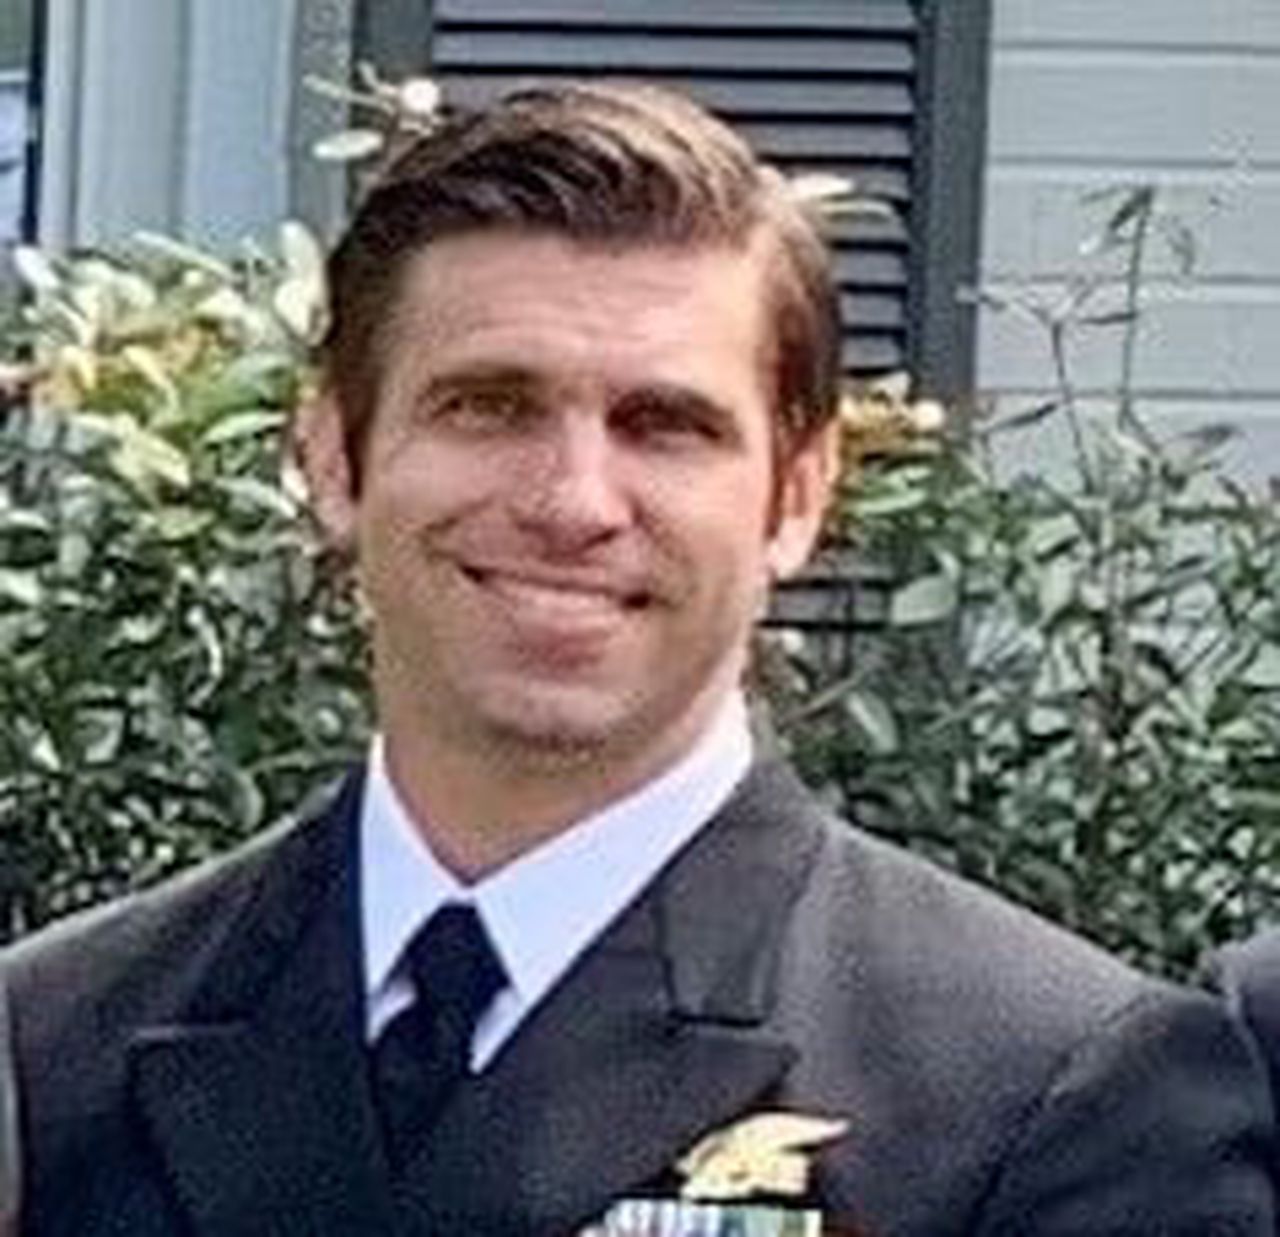 Navy SEAL killed in military free-fall parachute accident in Arizona